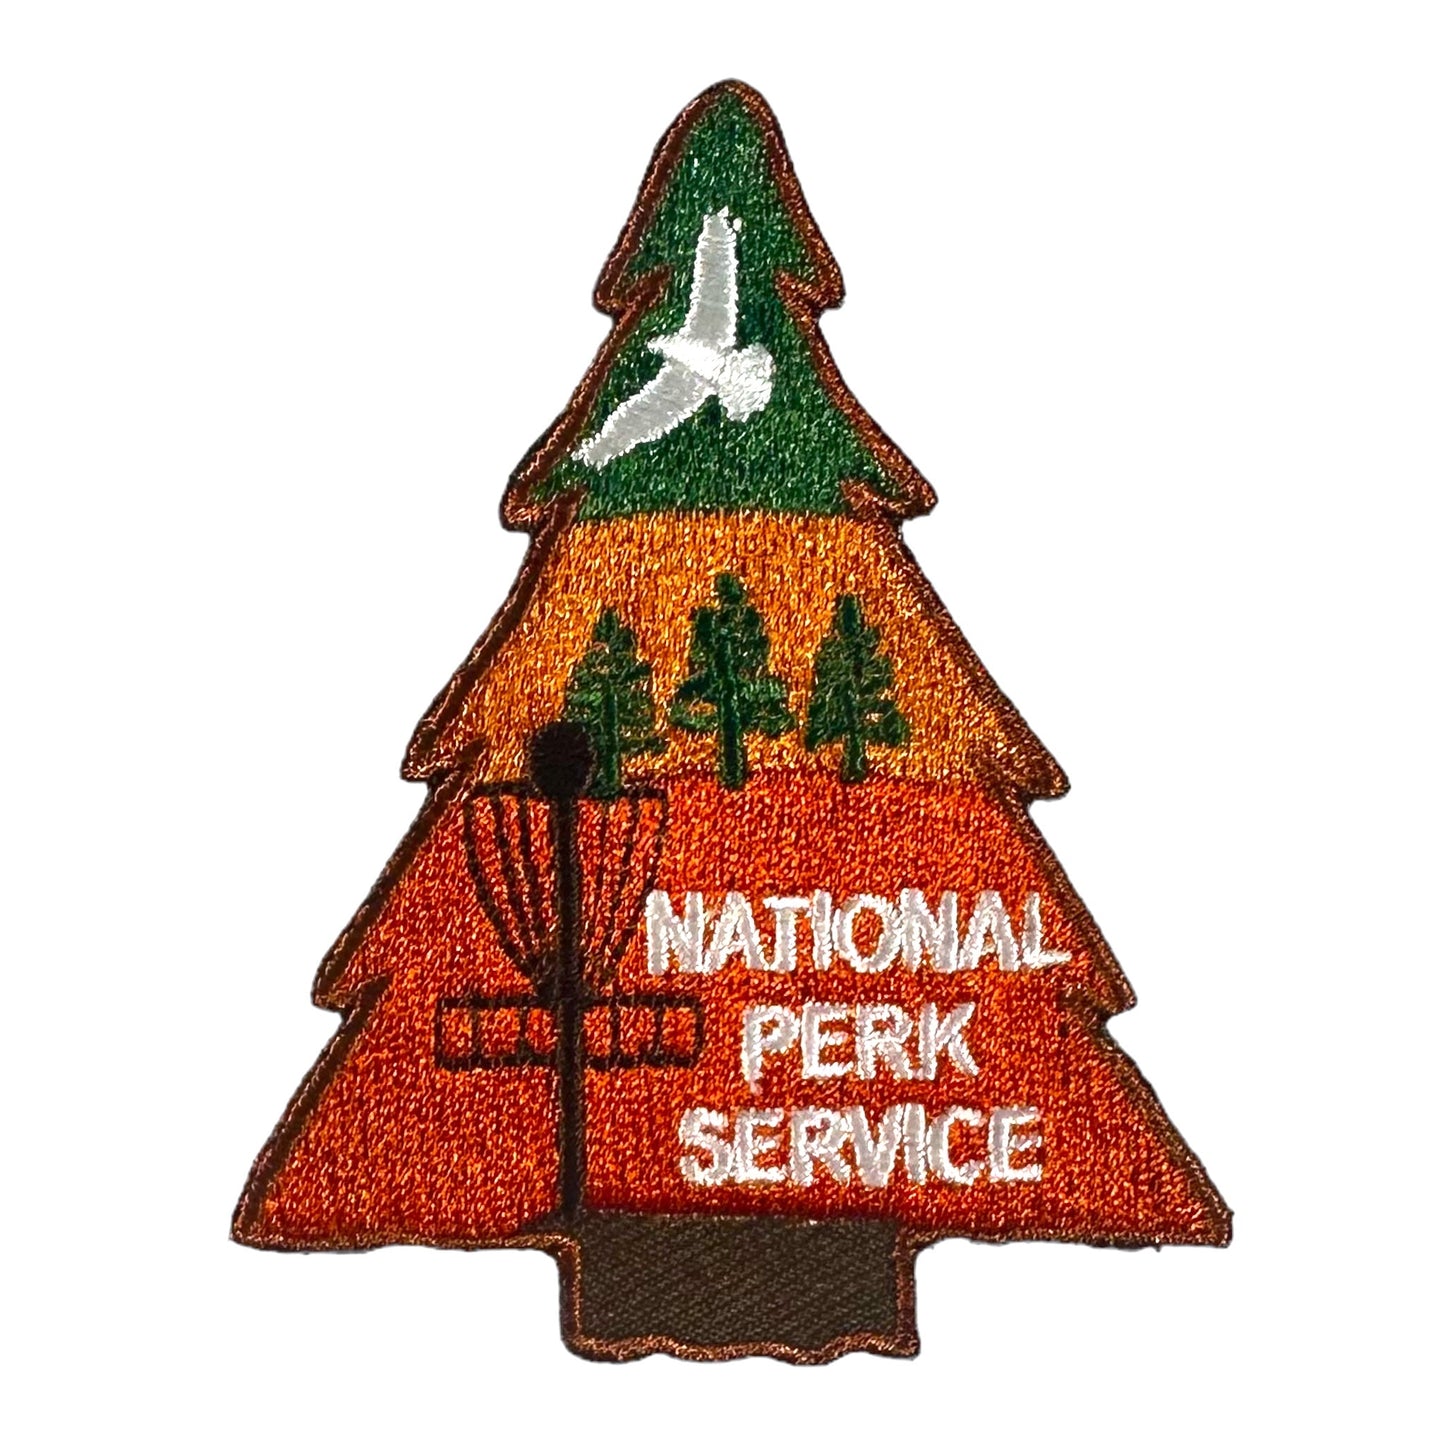 Perks and Re-creation National Perk Service Patch Disc Golf